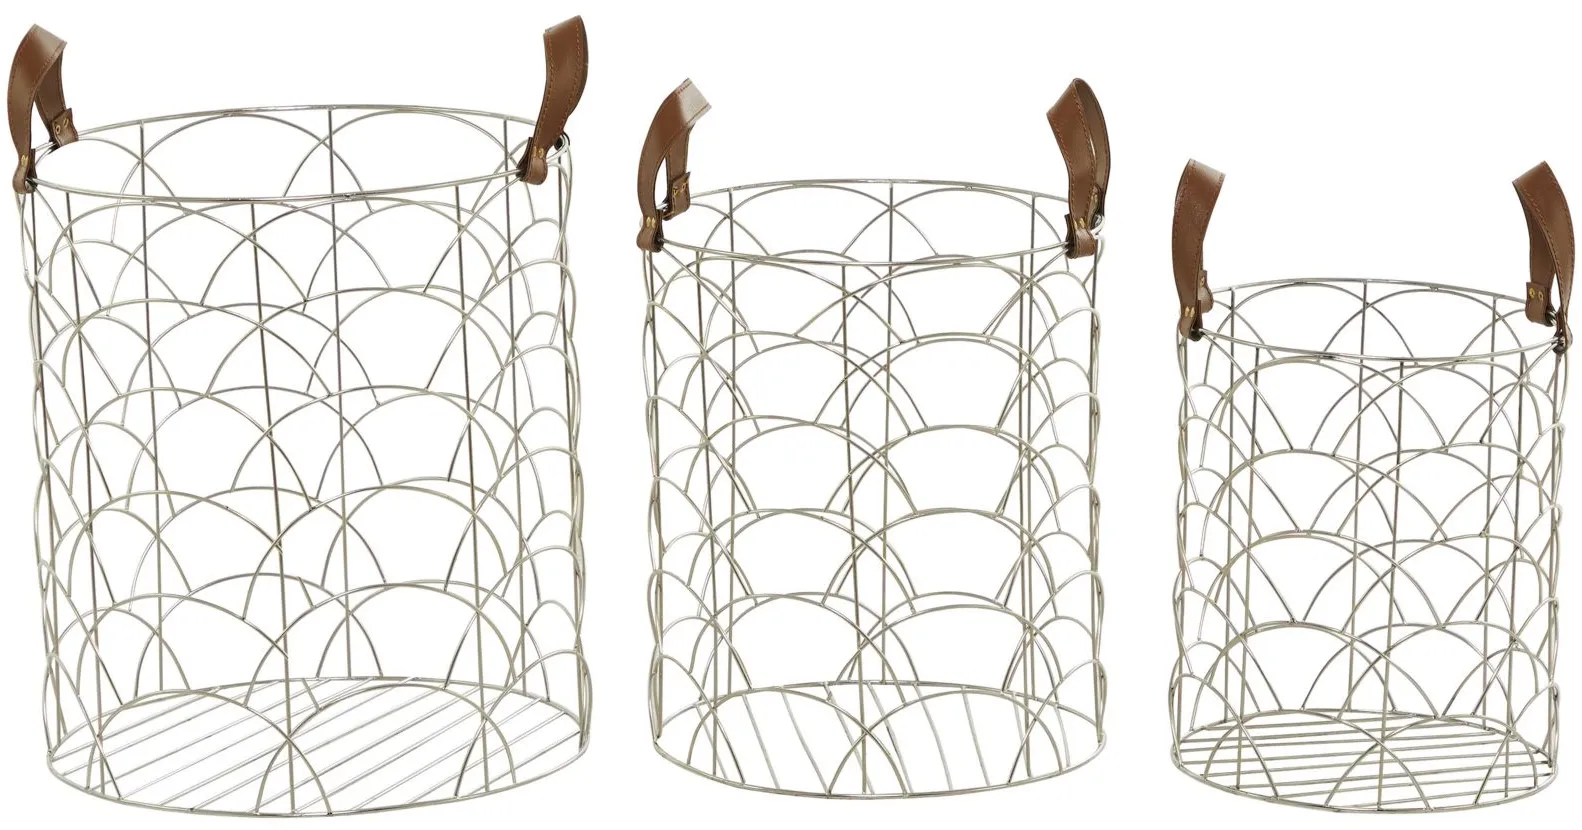 Ivy Collection Sainsbury Basket - Set of 3 in Silver by UMA Enterprises